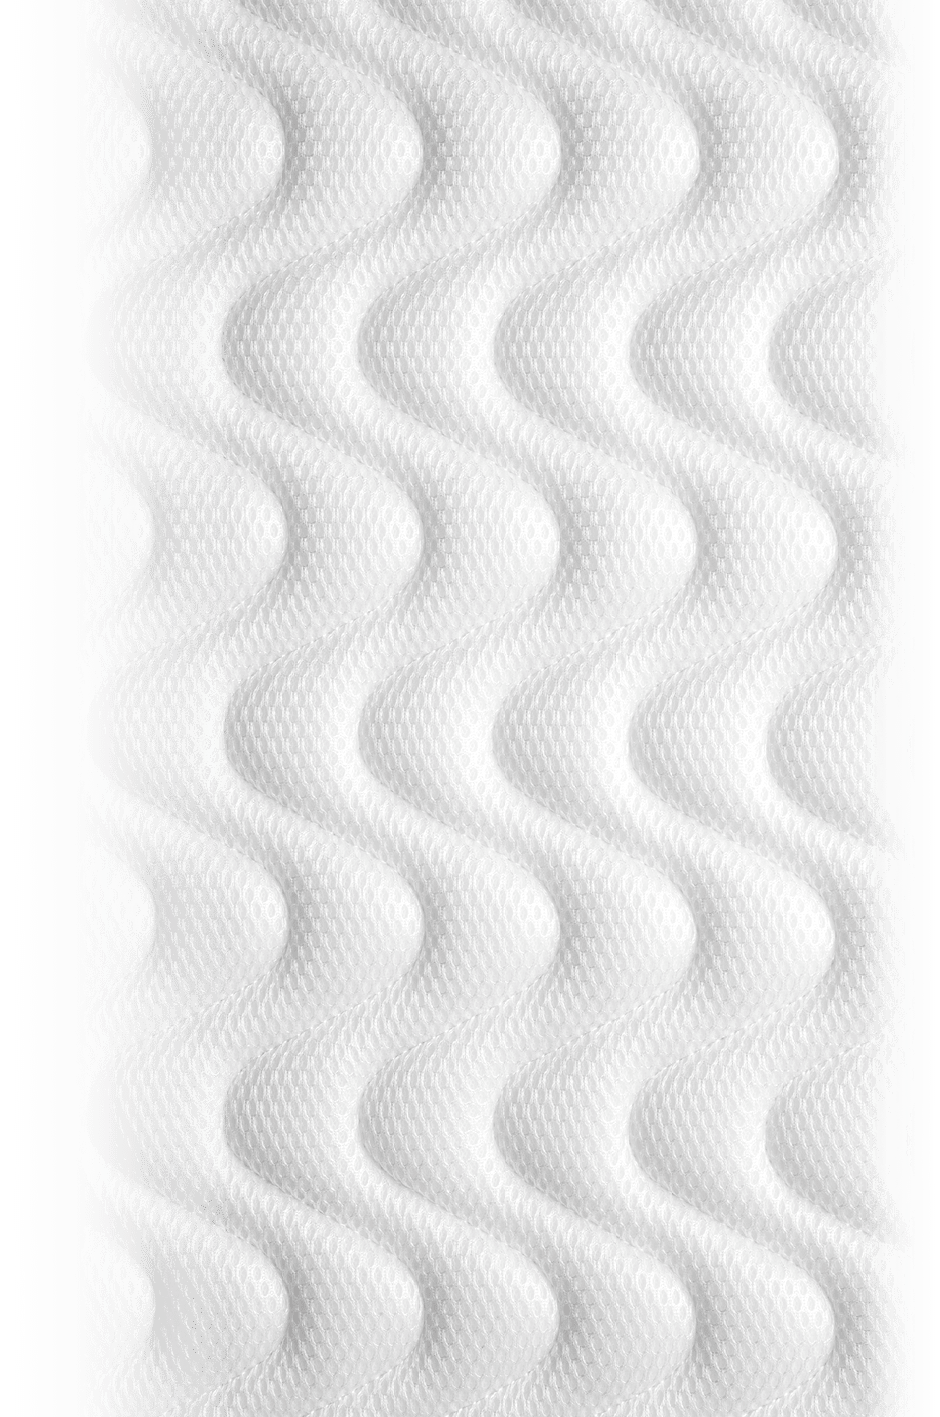 Close-up of comfortable mattress texture background